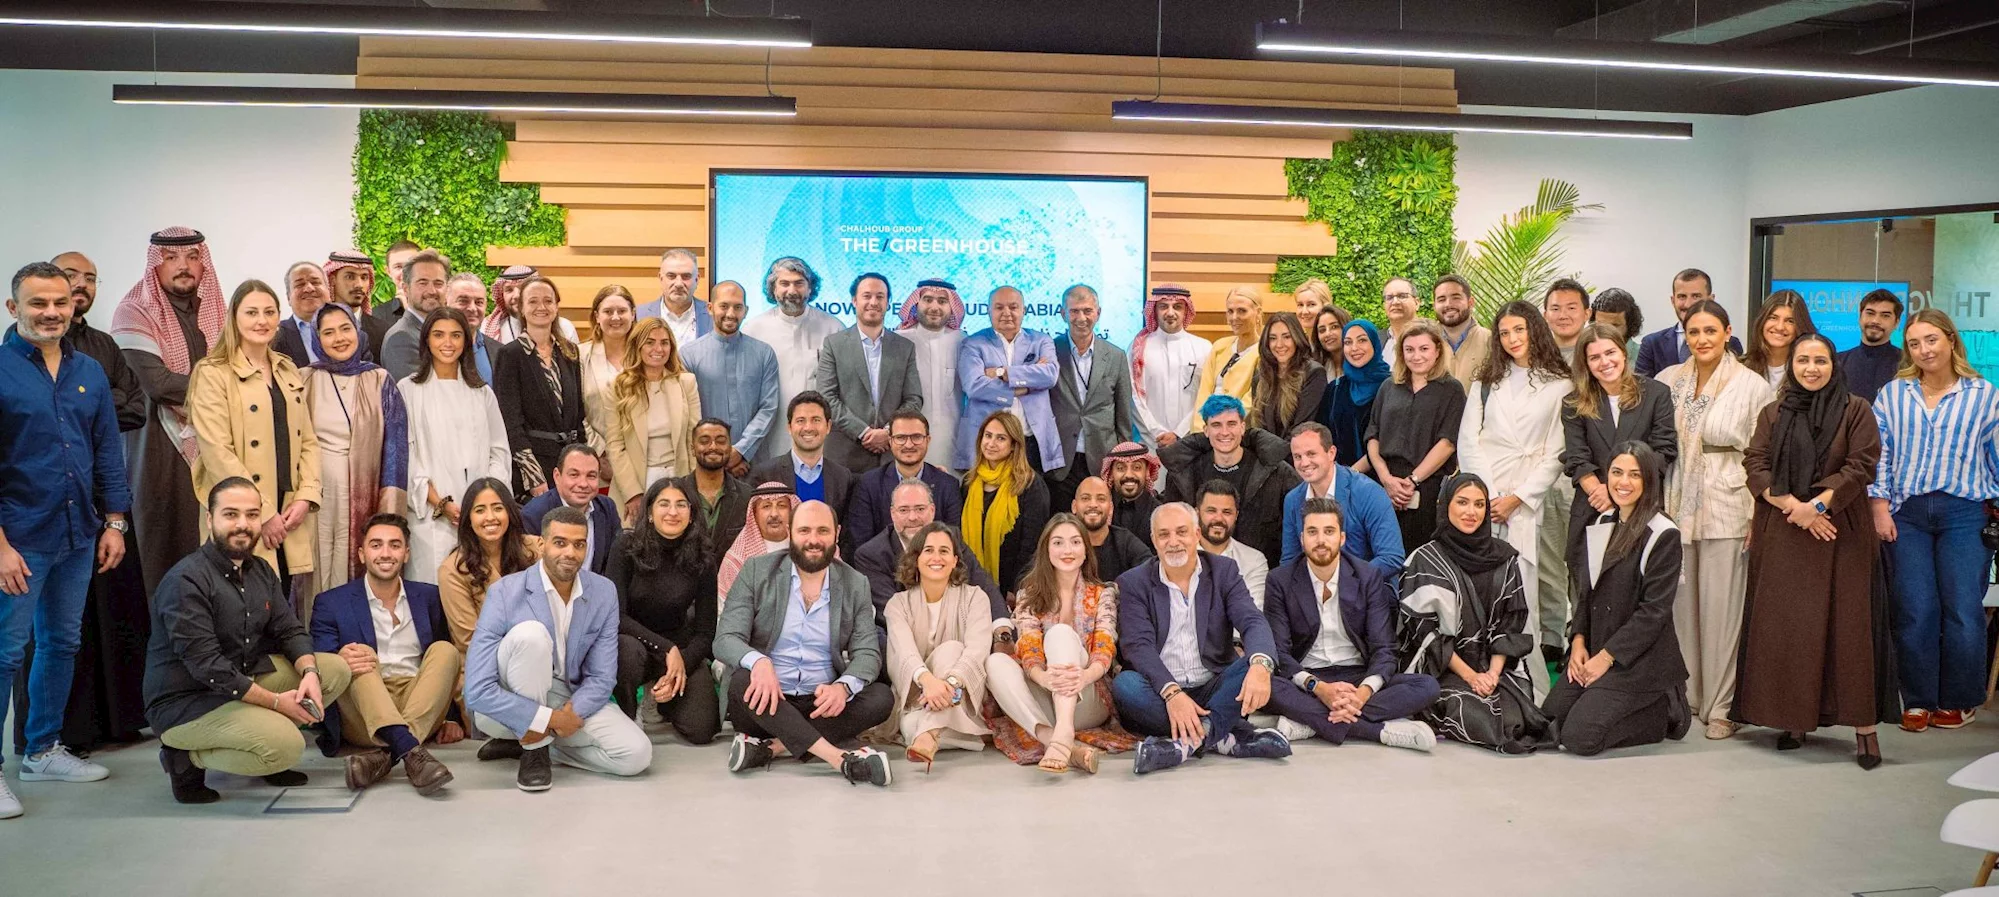 Chalhoub group unveils the greenhouse in riyadh for innovators and entrepreneurs across the kingdom